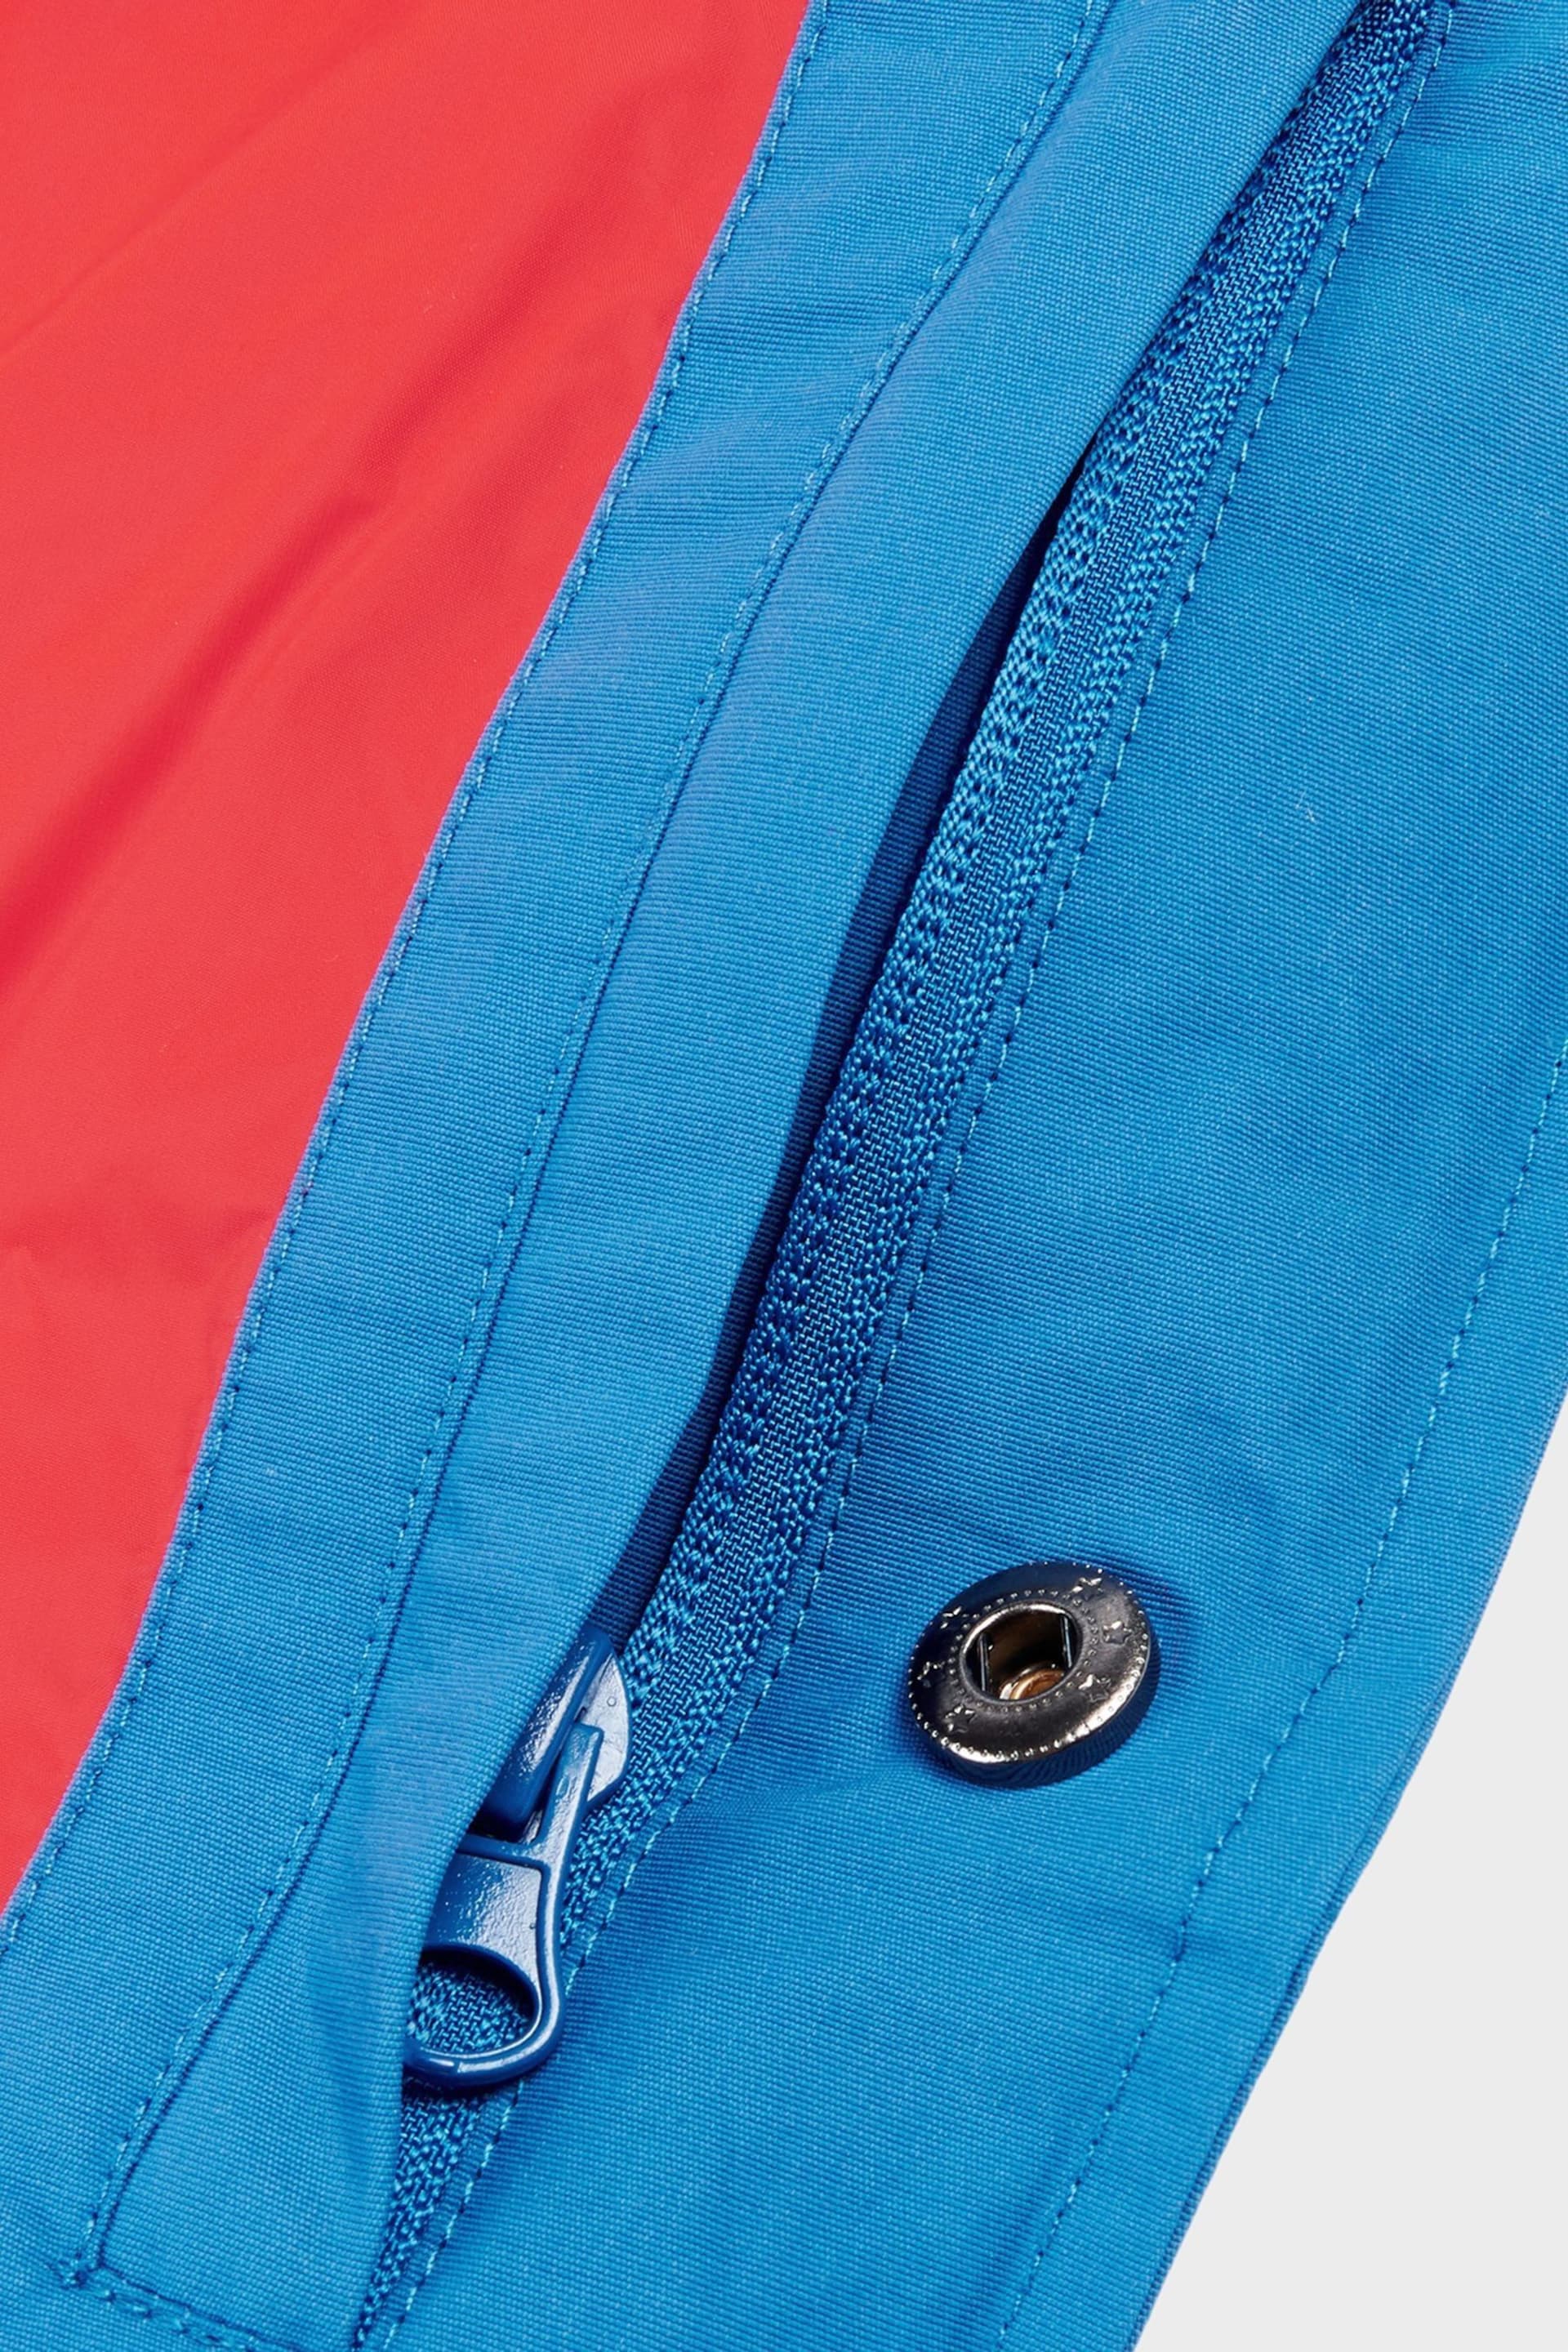 Penfield Blue Outback Gilet - Image 8 of 9